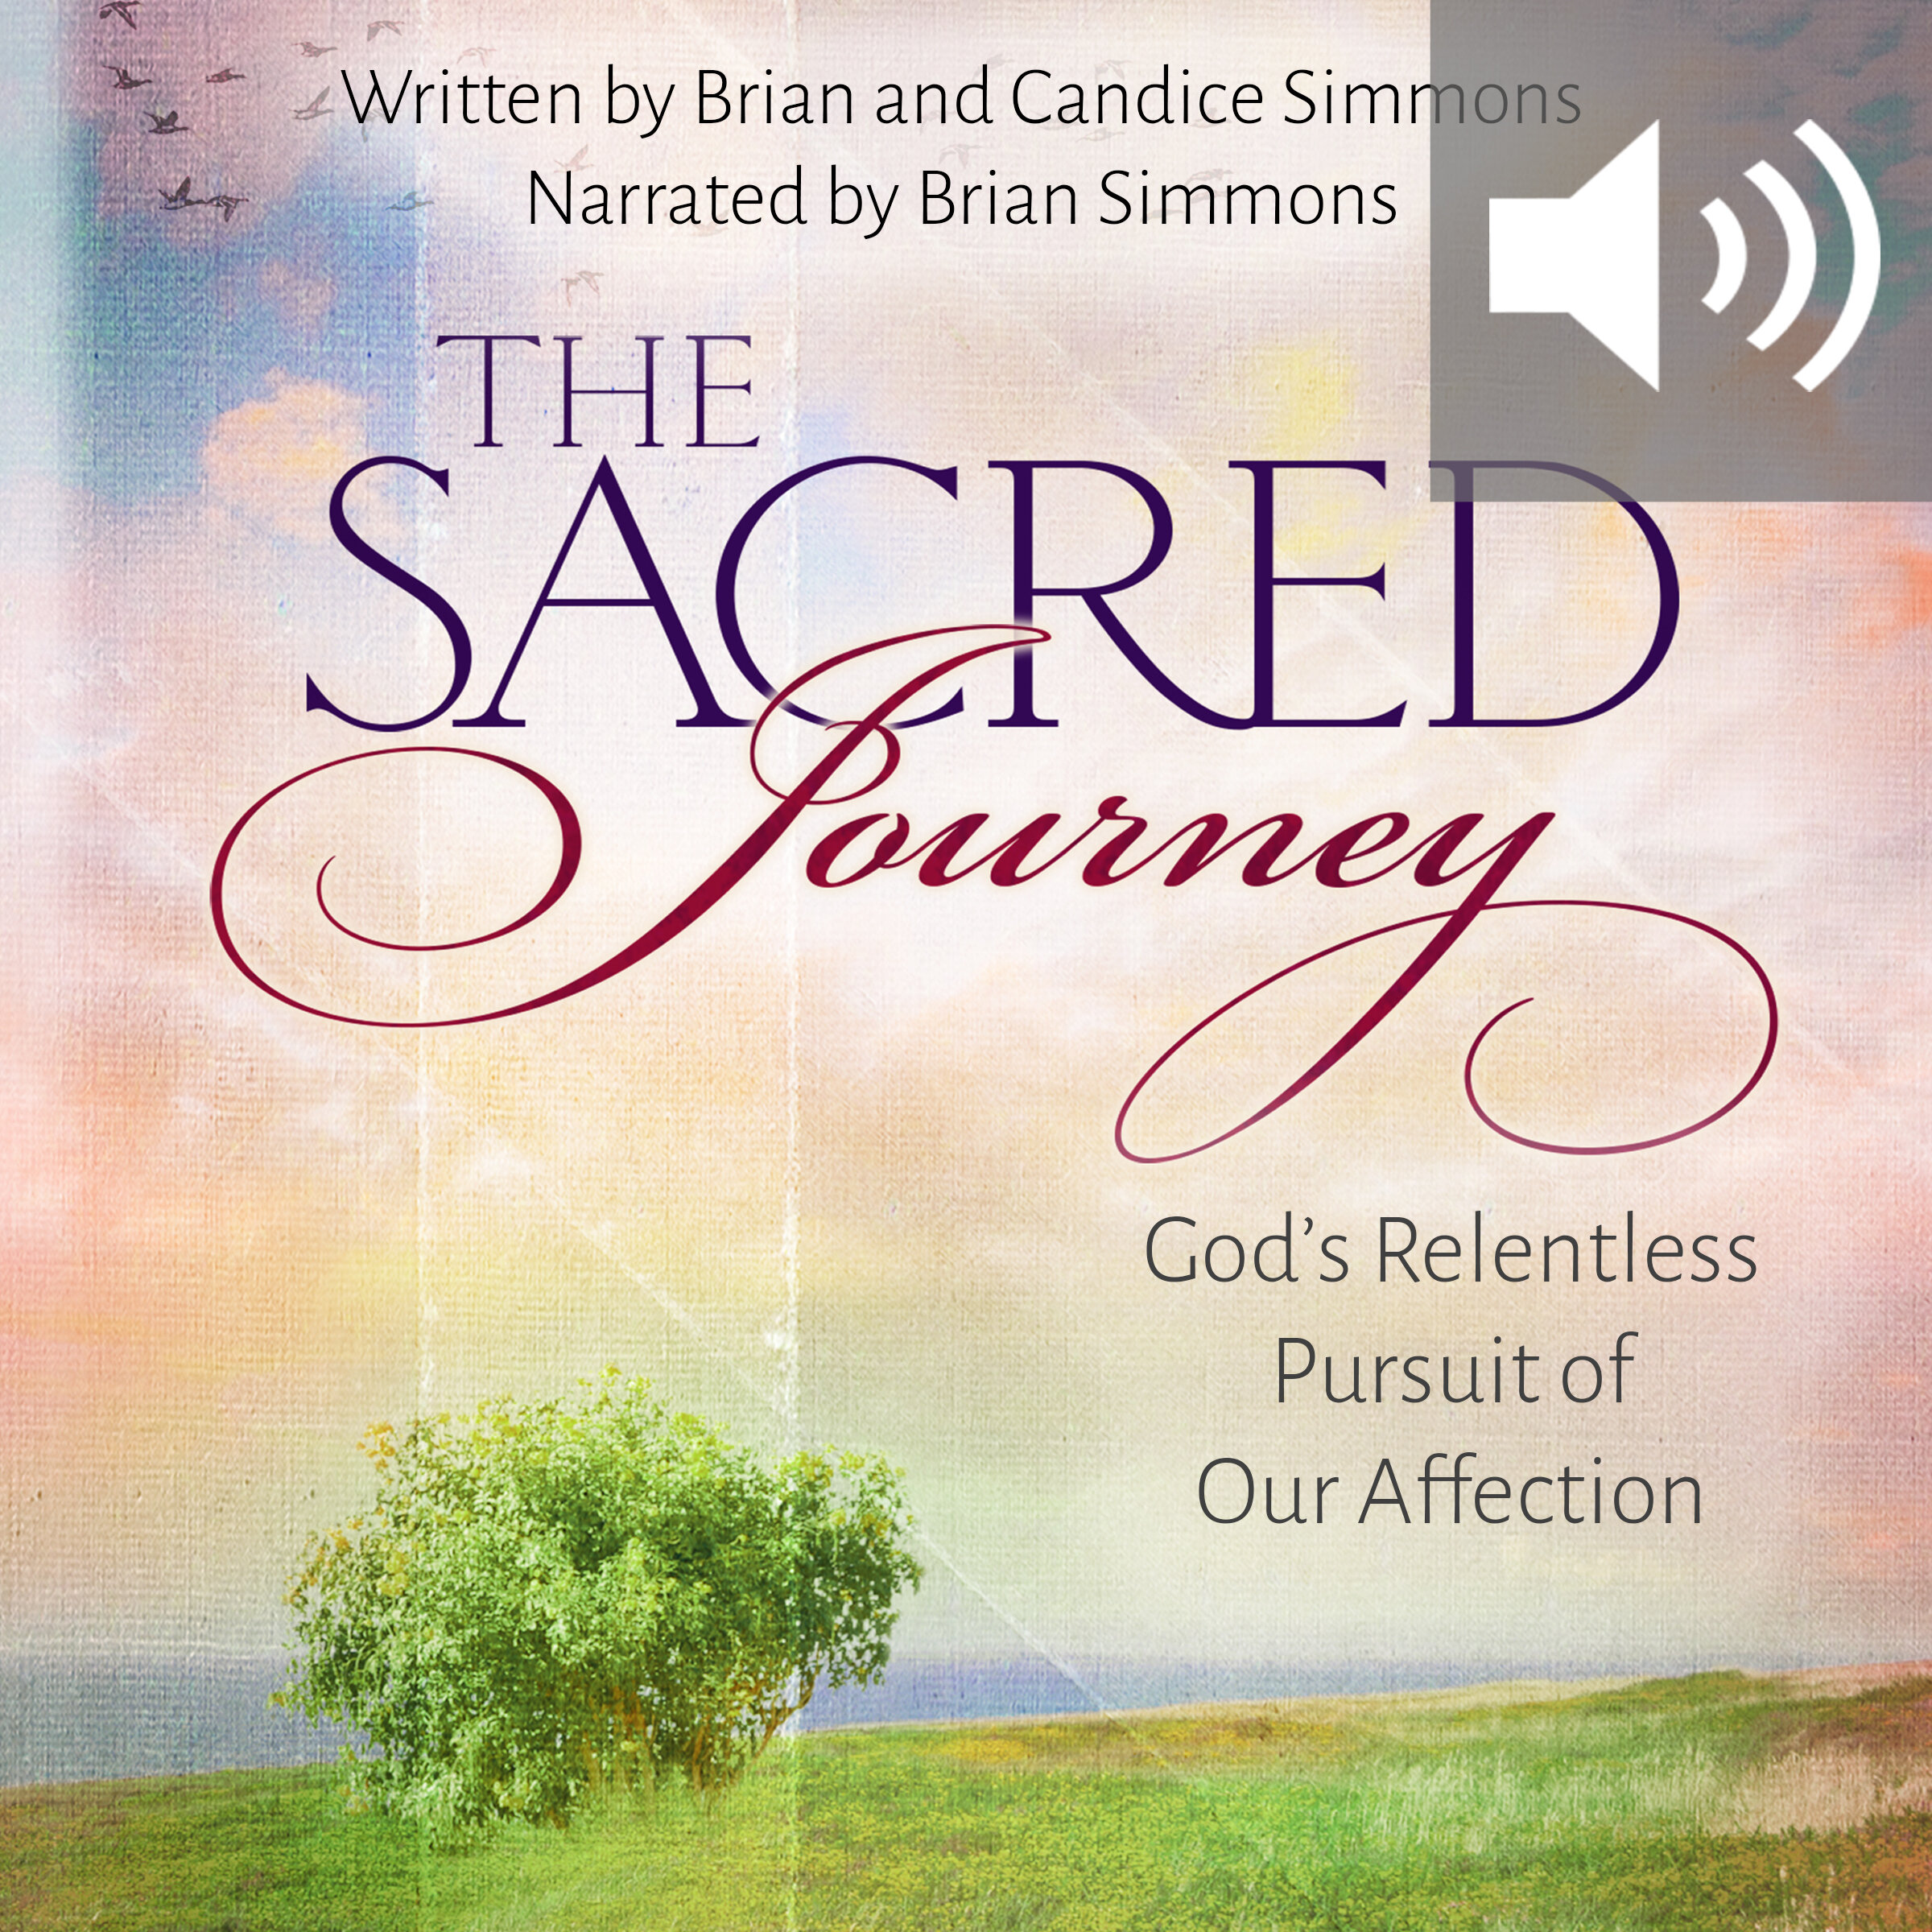 word meaning sacred journey